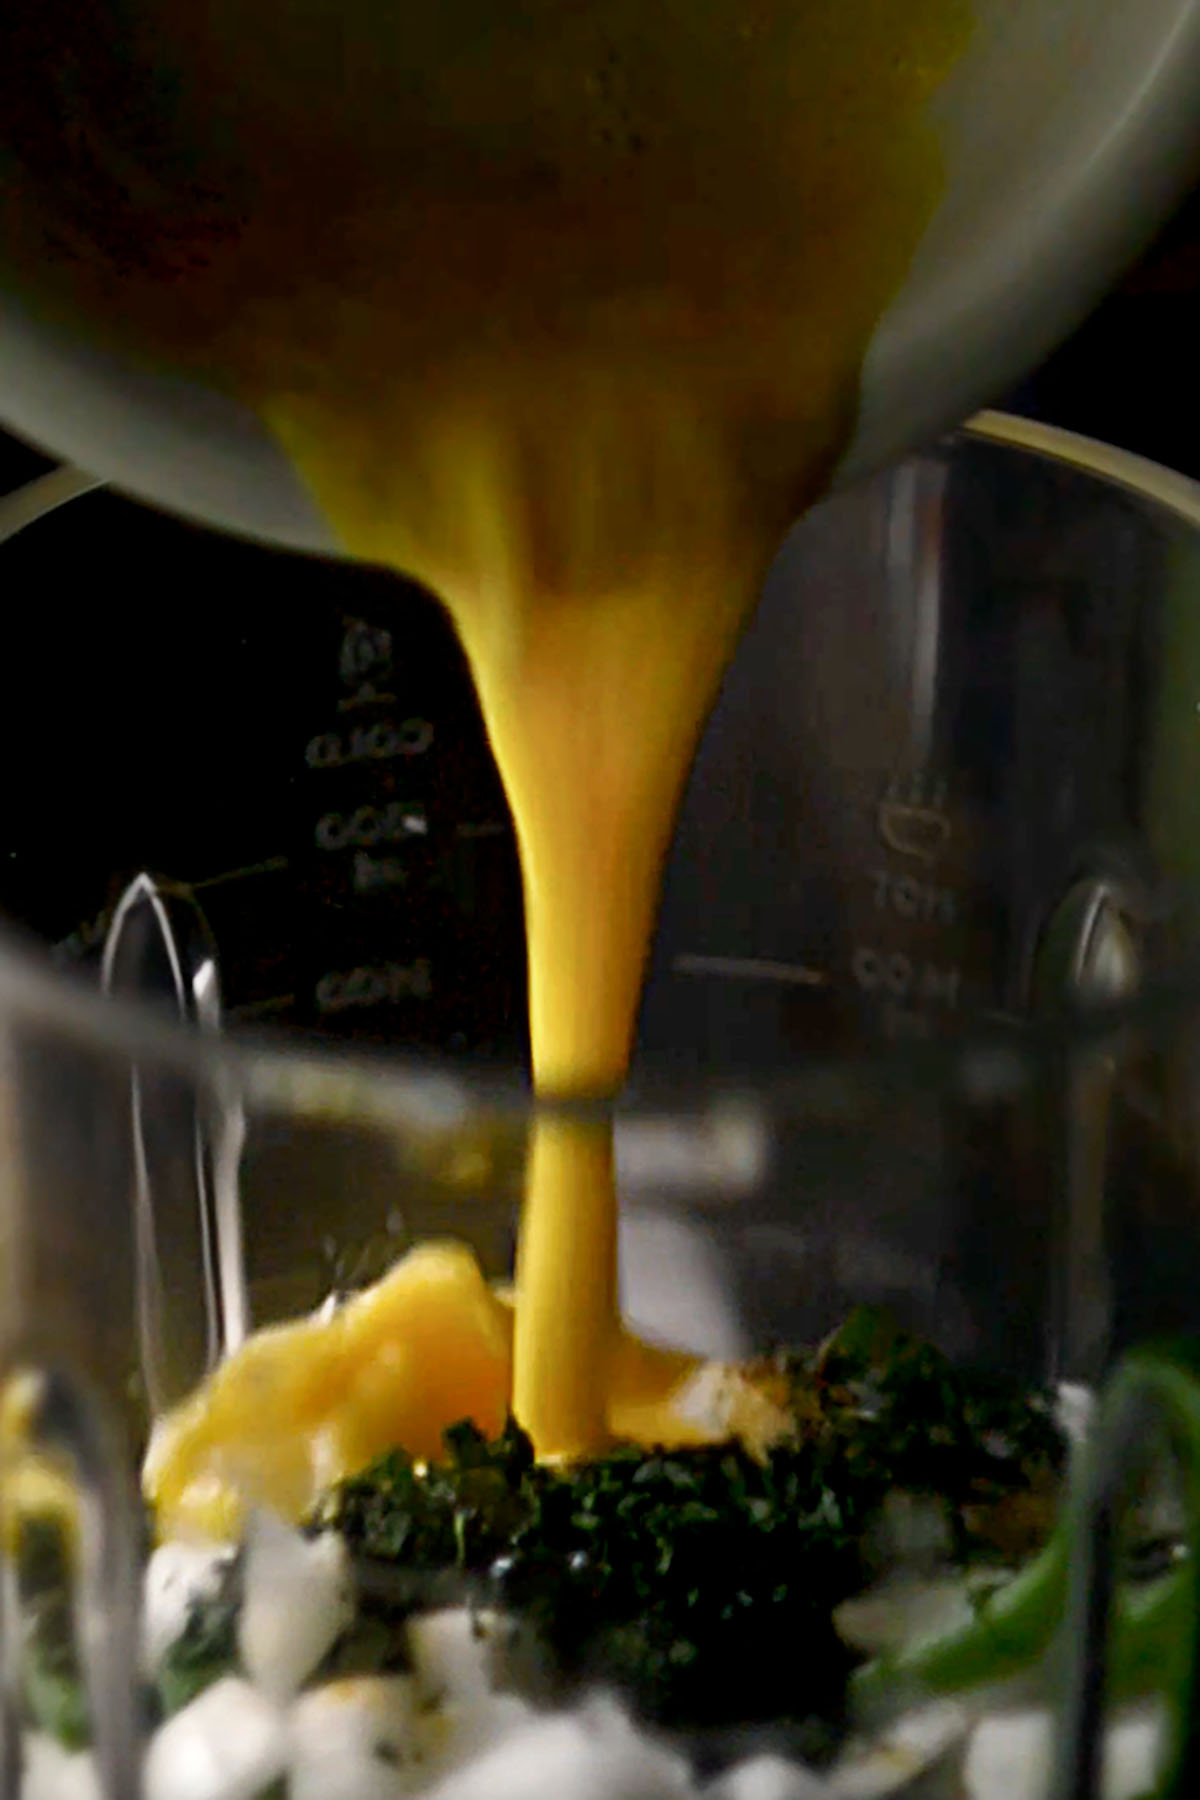 Egg being poured into a cooking blender.